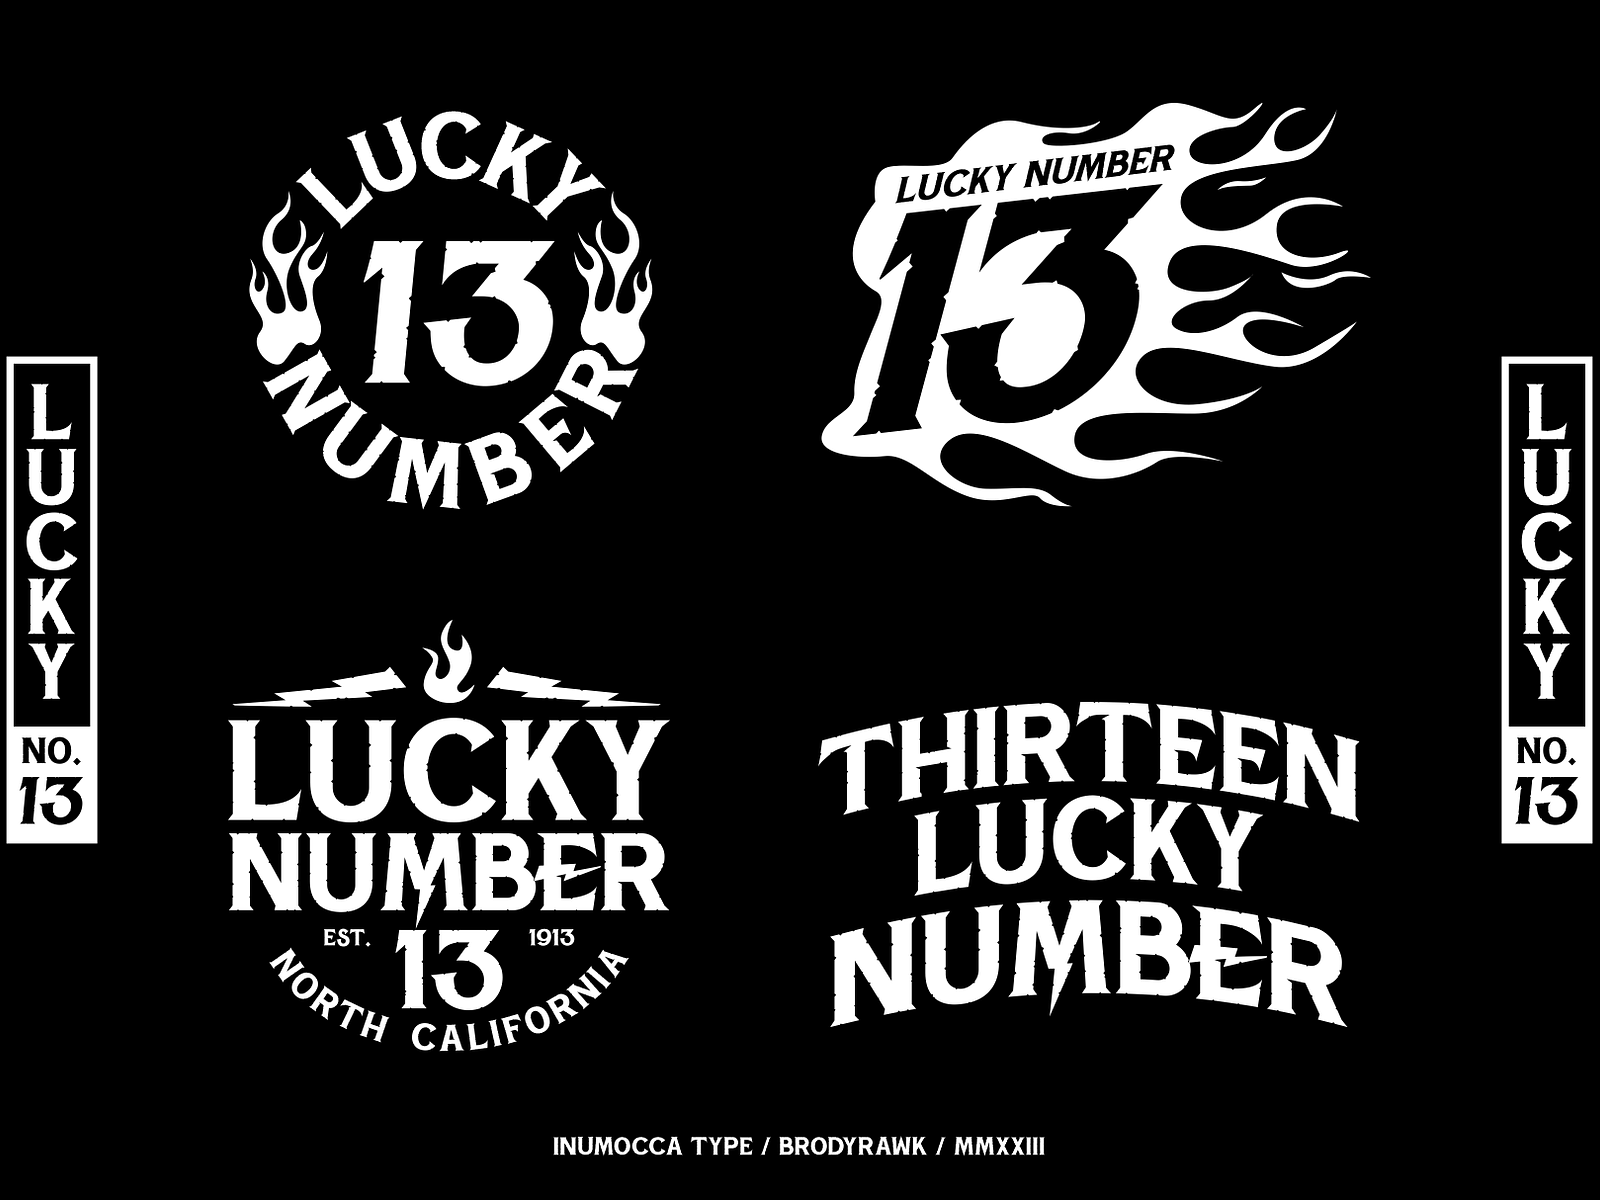 Lucky Number 13 by inumocca on Dribbble